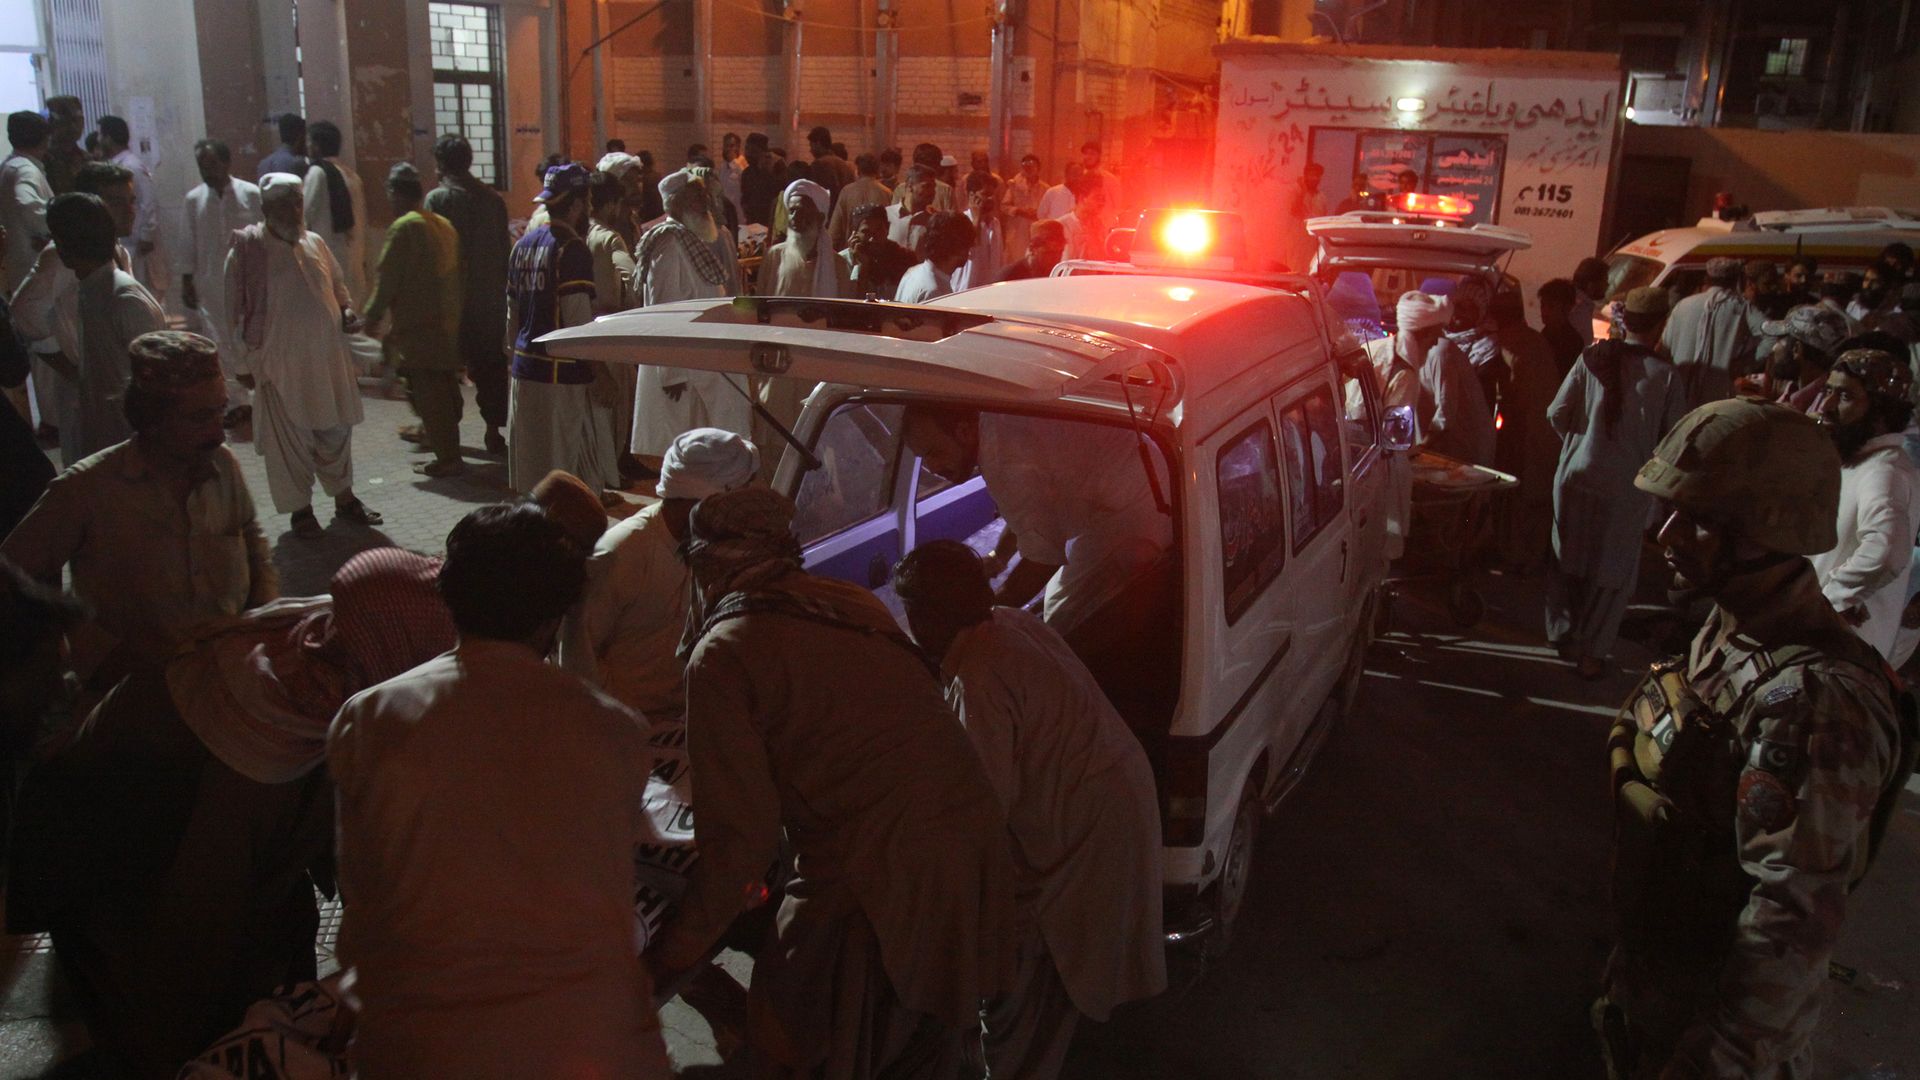 Rescue worker preparing to transport the injured and dead to a hospital after a suicide bombing in Pakistan.